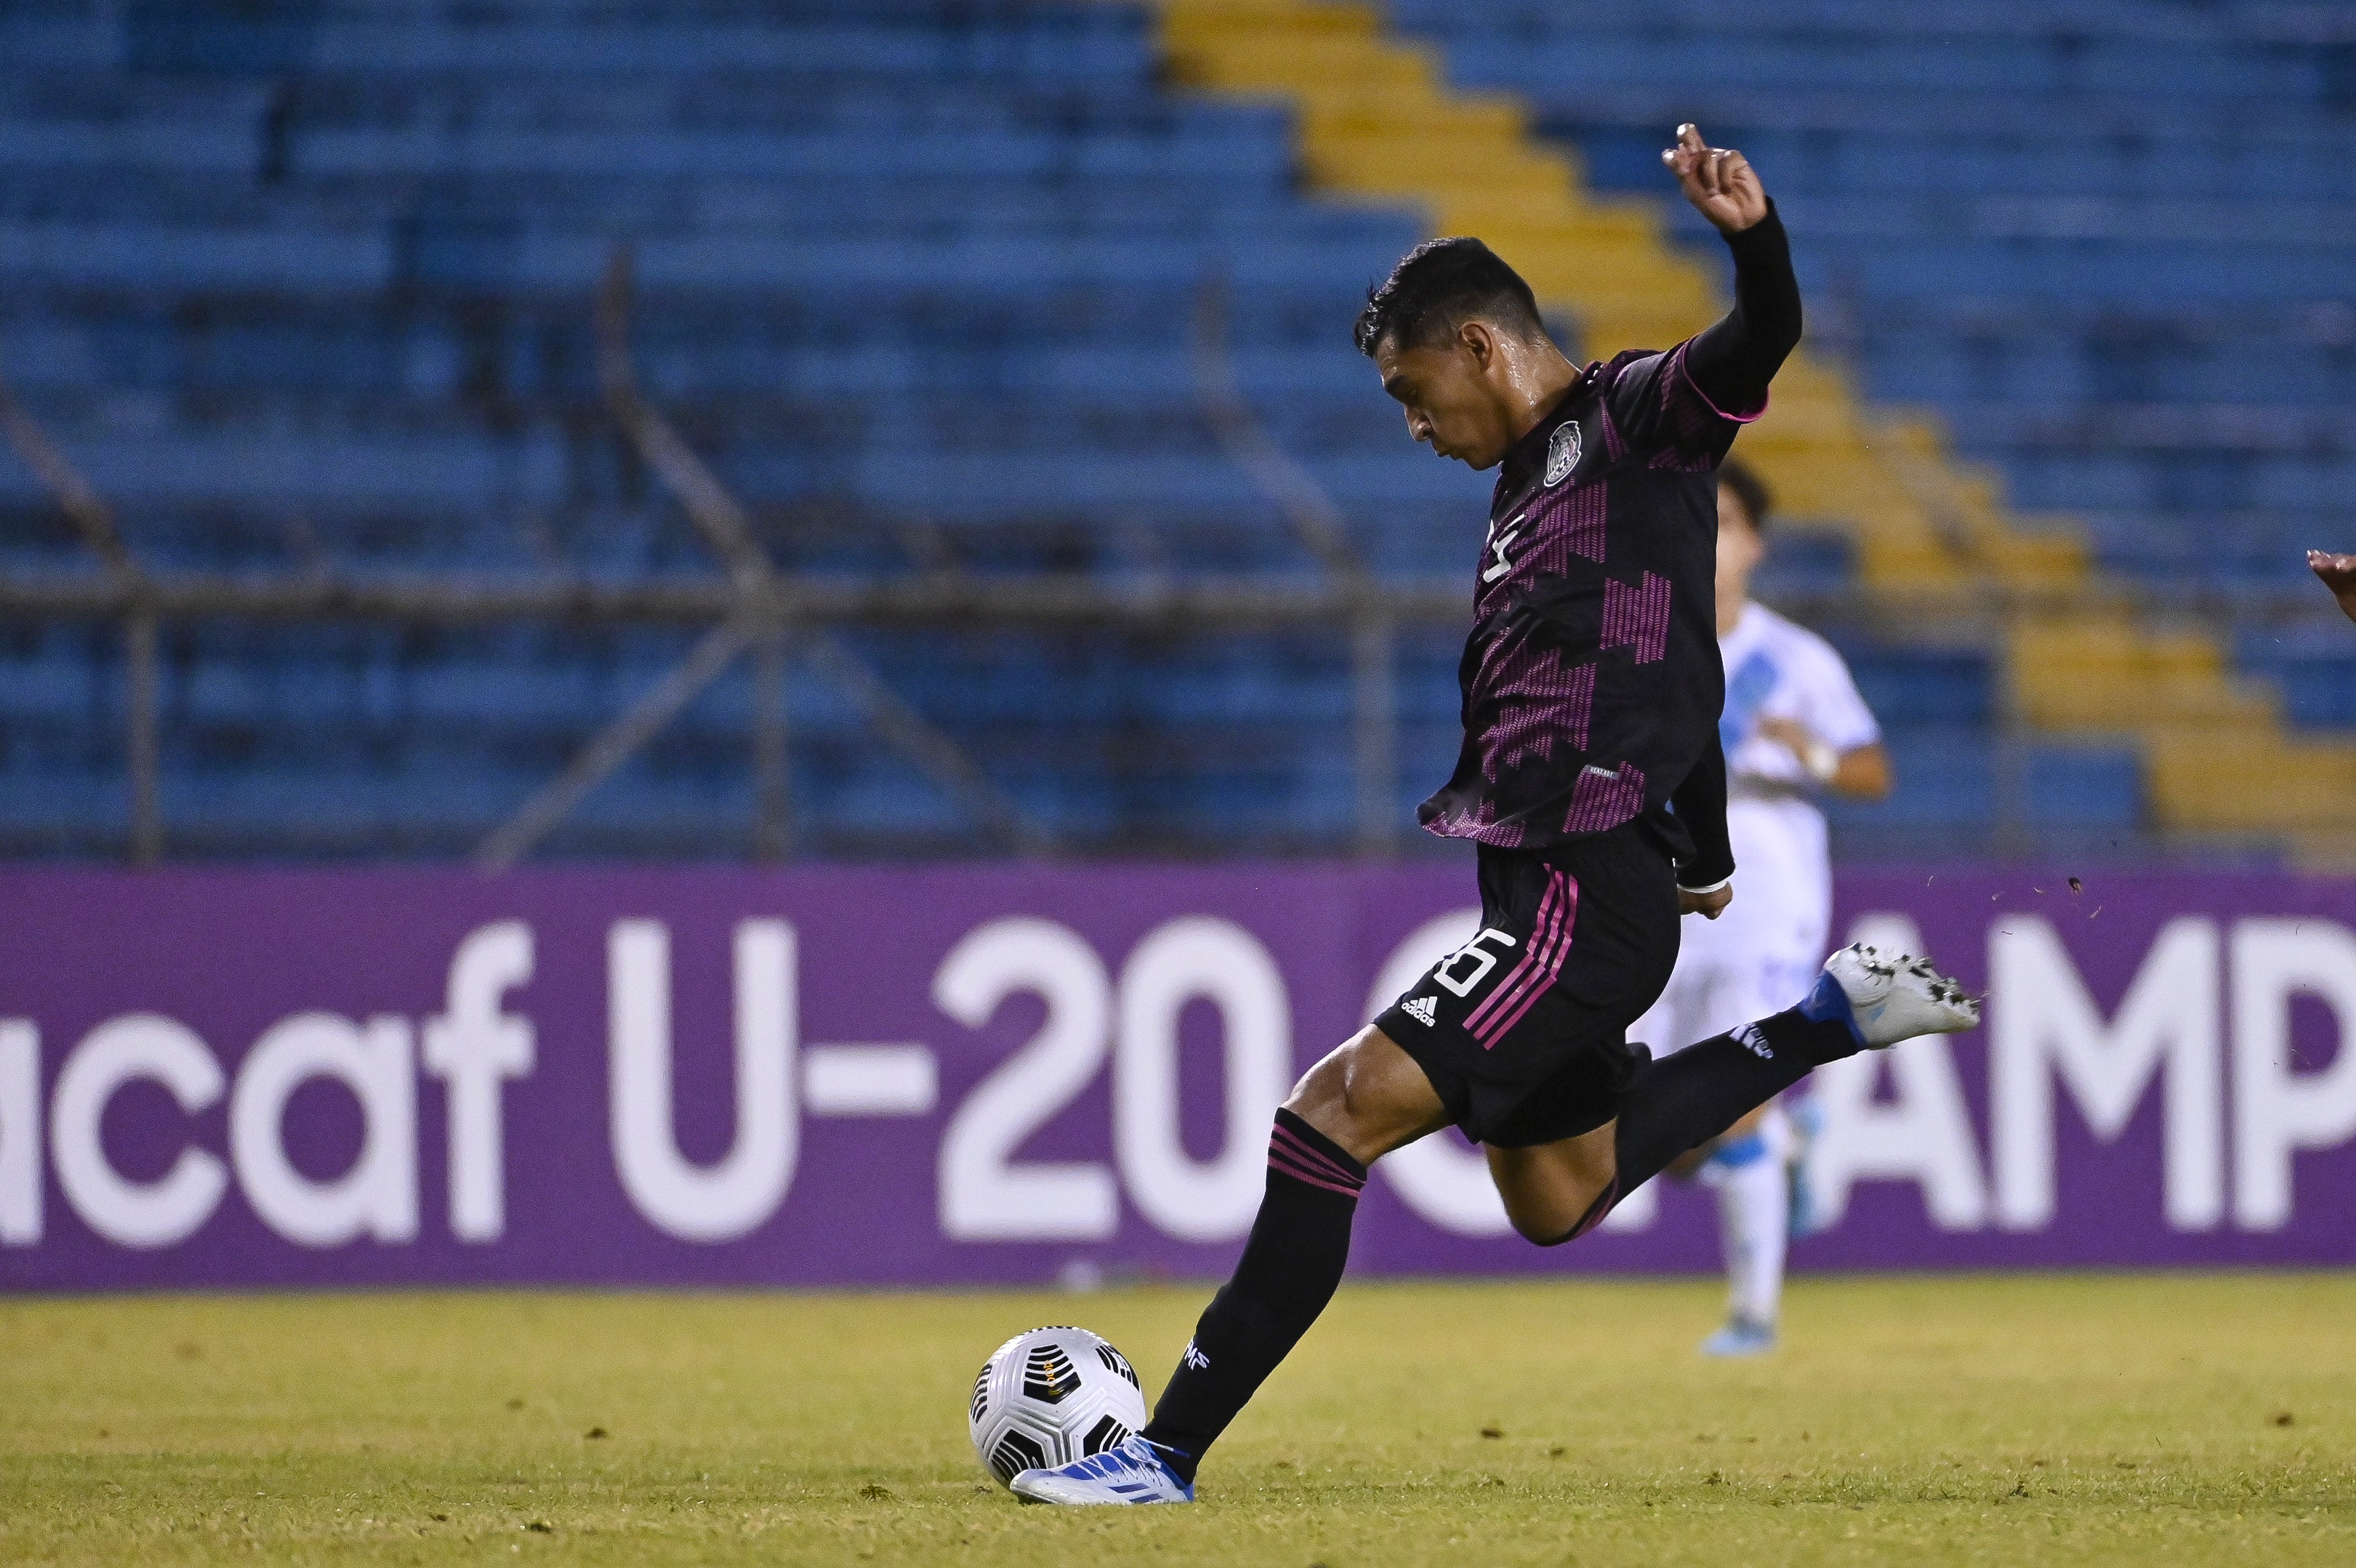 After the defeat, the Mexican national team was definitely left out of the two biggest under-20 sports fairs in international football (Image: Twitter/miseleccionmx)